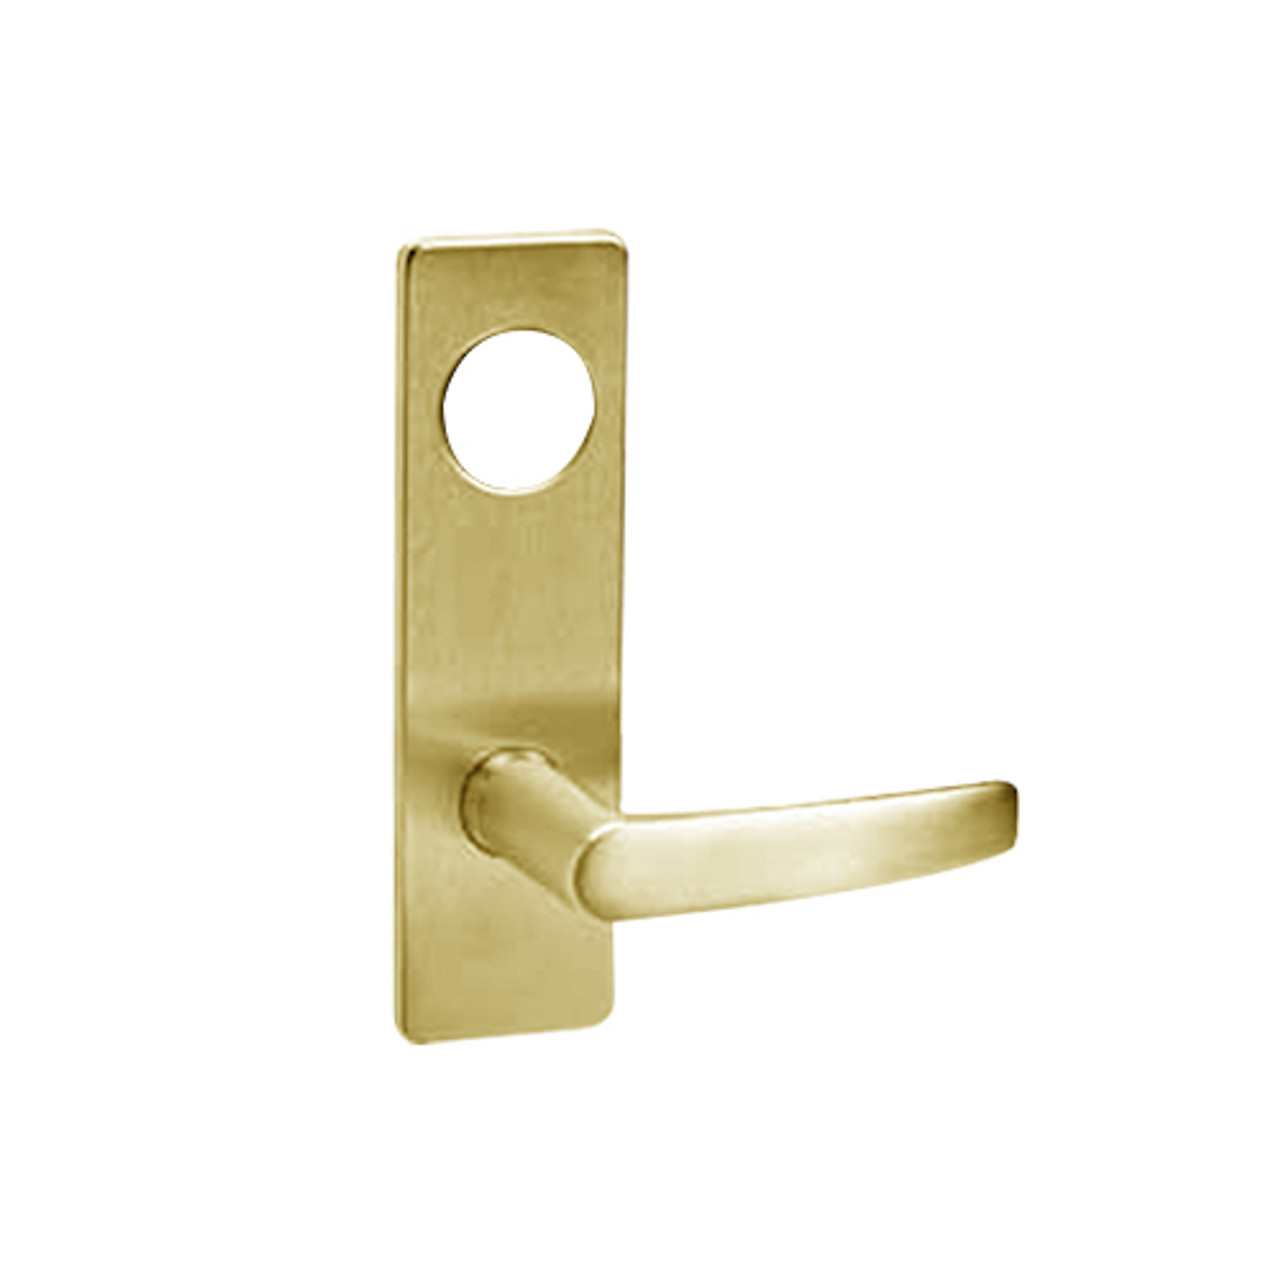 ML2056-ASP-605-CL7 Corbin Russwin ML2000 Series IC 7-Pin Less Core Mortise Classroom Locksets with Armstrong Lever in Bright Brass